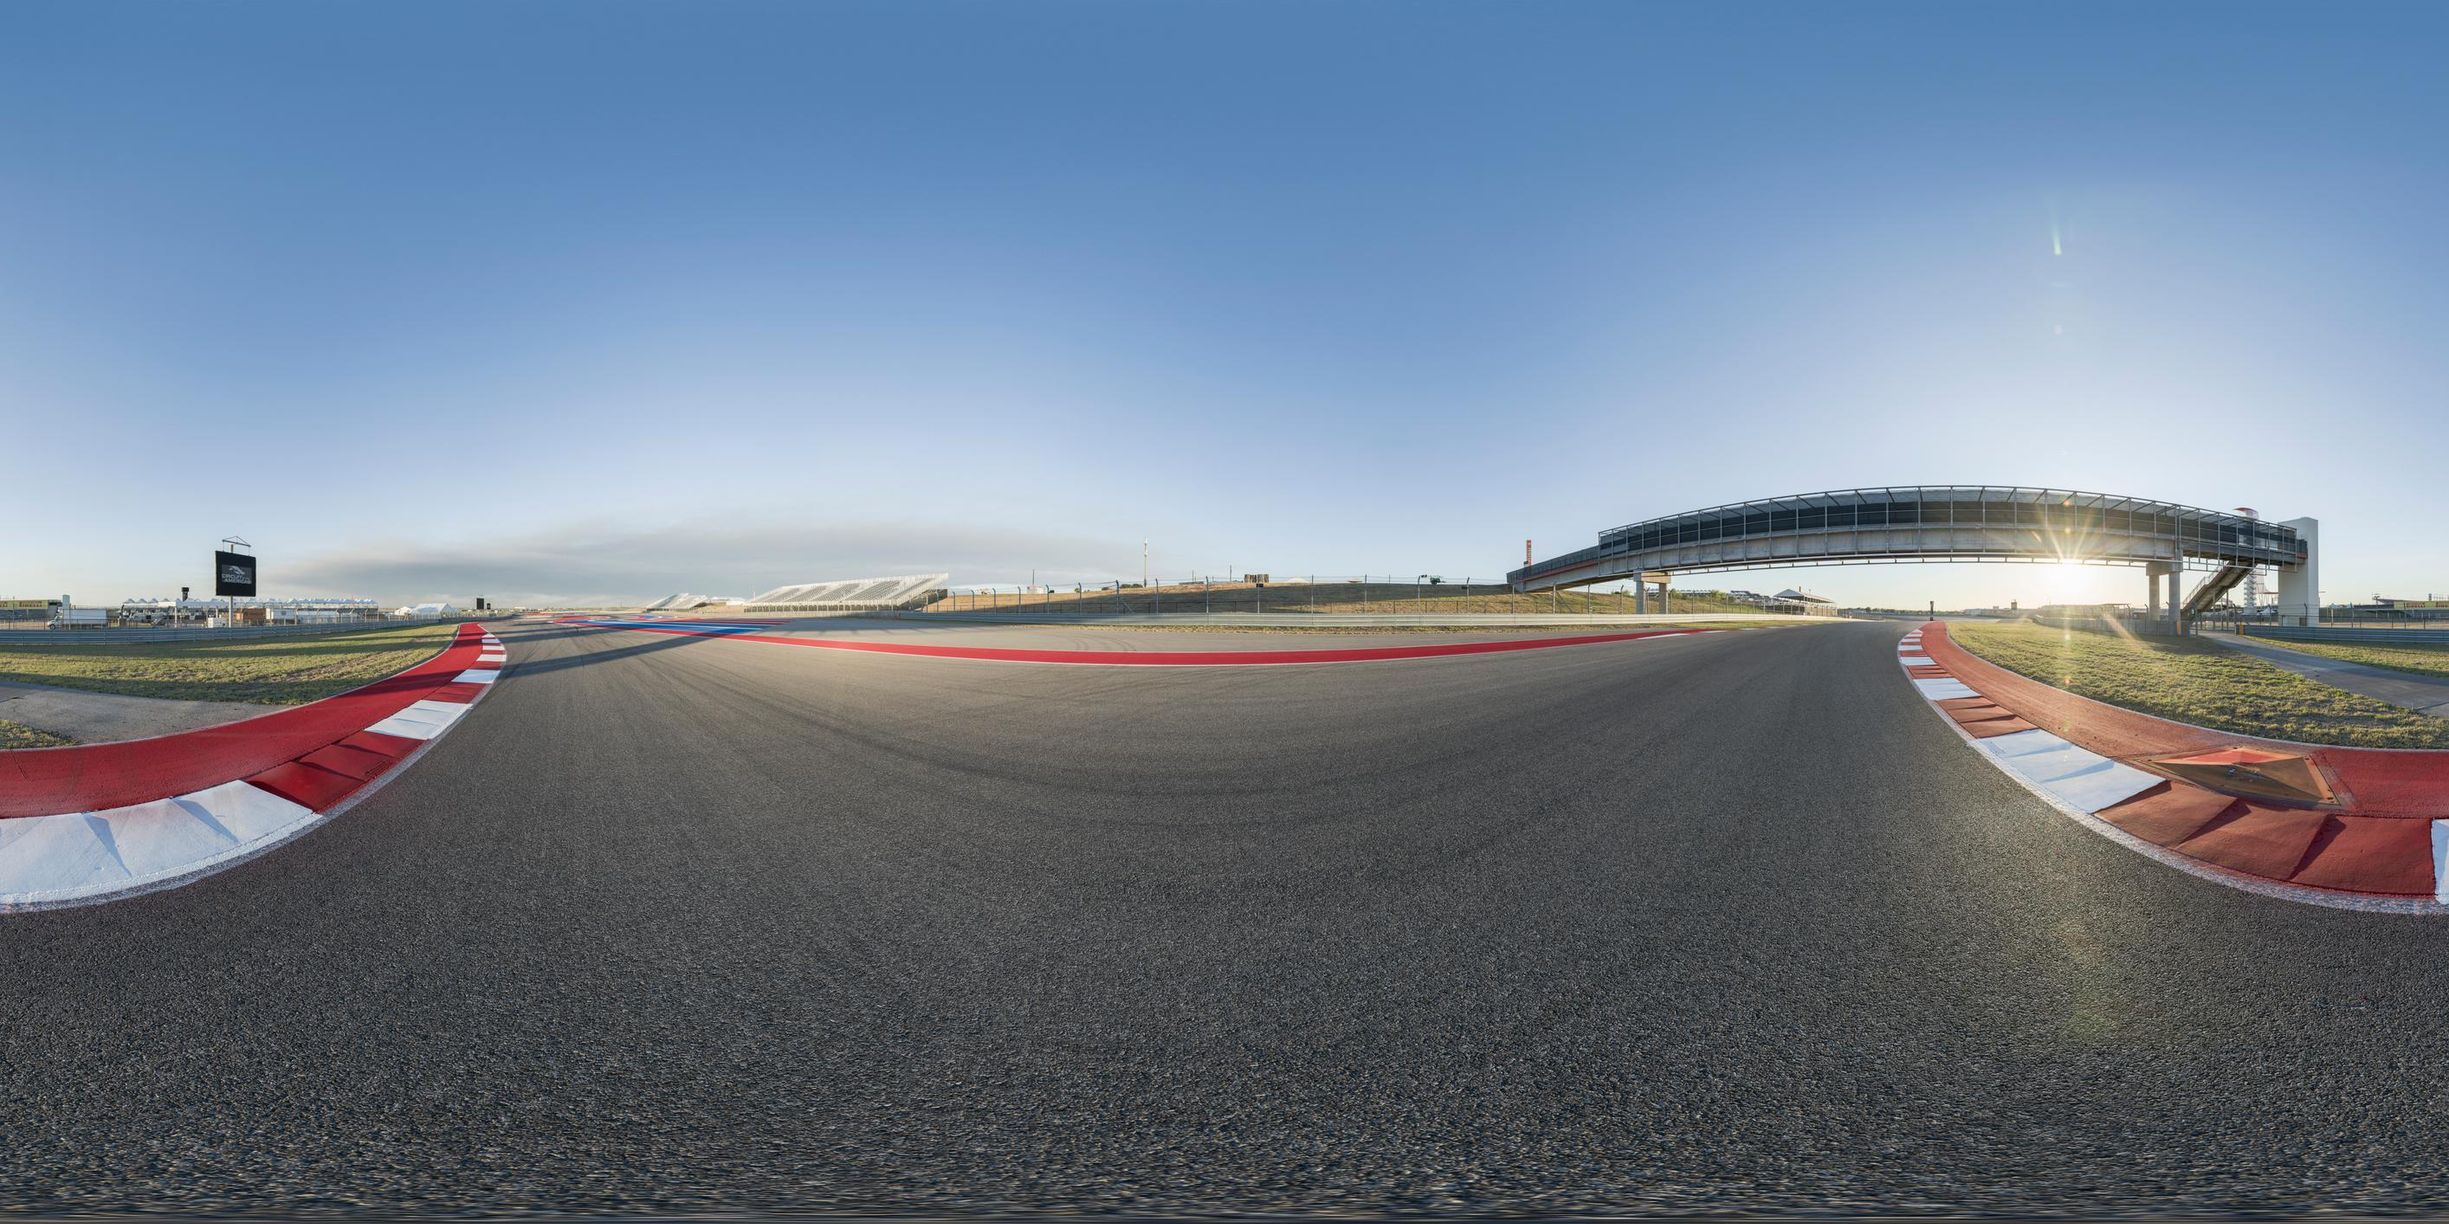 the view from the top of a racing track with a sun shining behind it in a panoramic